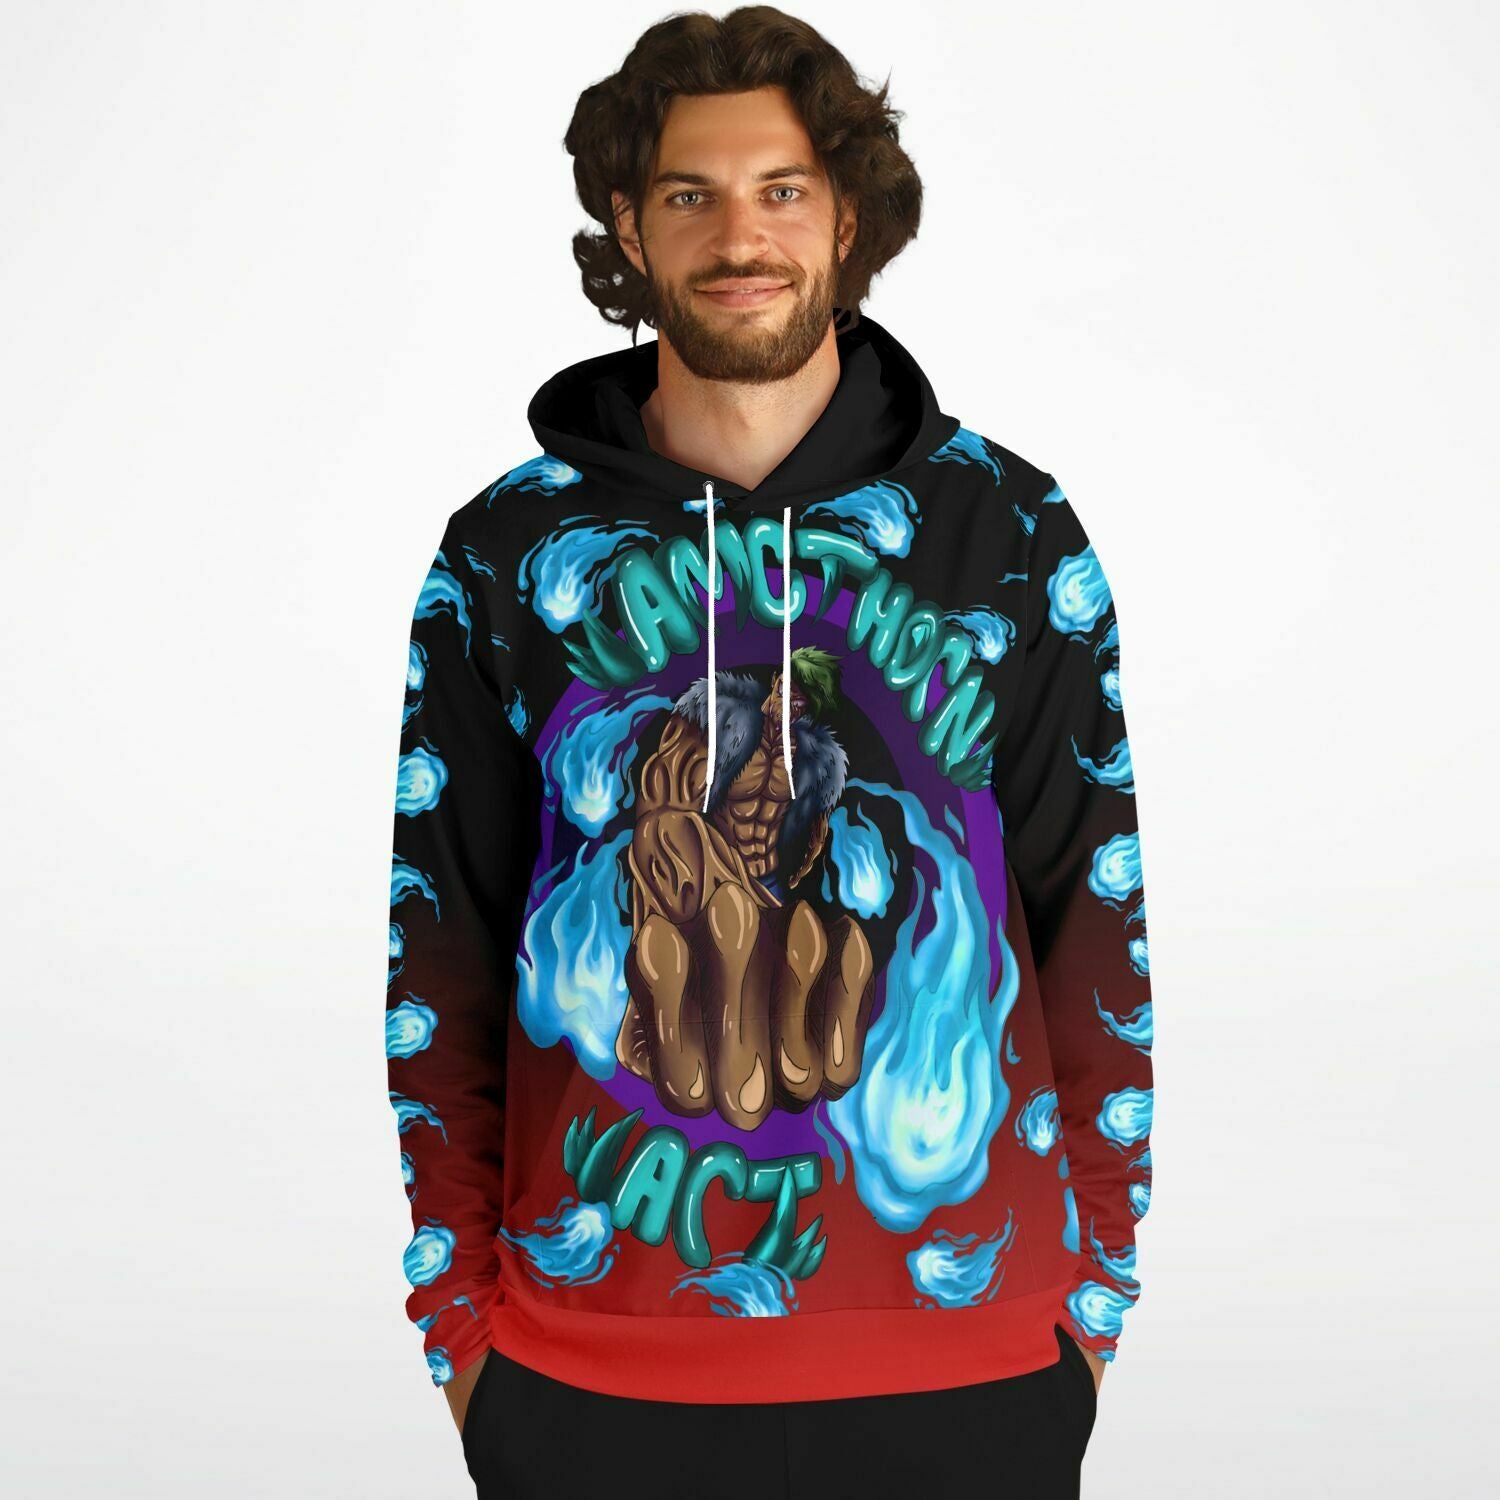 AMCThorn Art Flamesplosion Hoodie with Red Gradient Subliminator